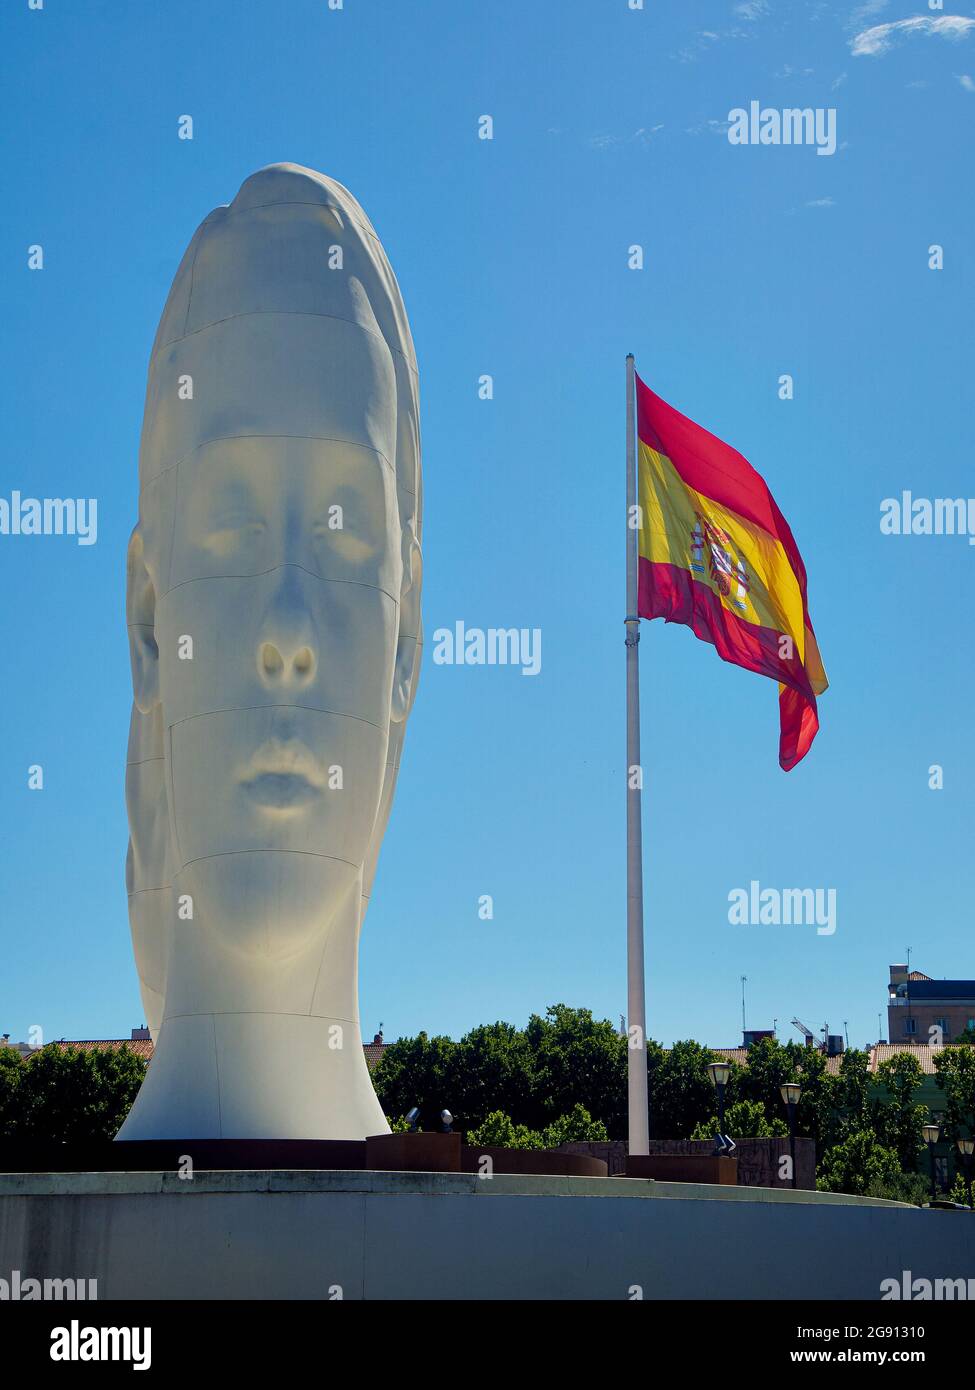 Madrid, Spain - July 12, 2021. Julia, a sculpture by Jaume Plensa with the Spanish flag in the background. Plaza de Colon square. Madrid, Spain. Stock Photo